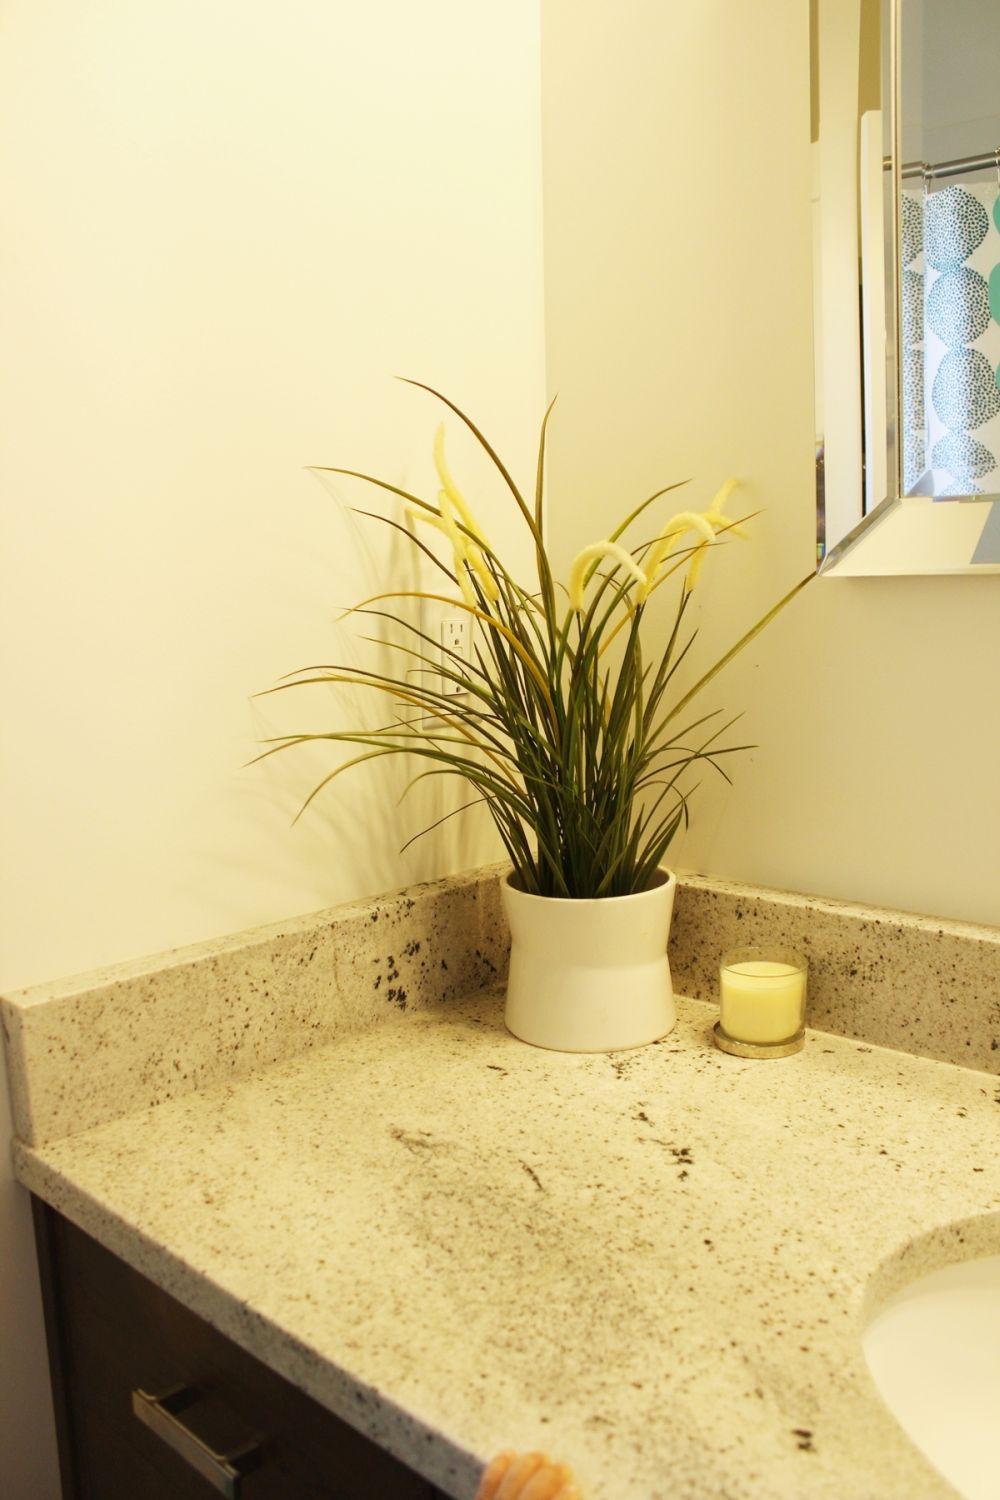 Decorating the bathroom with small plants